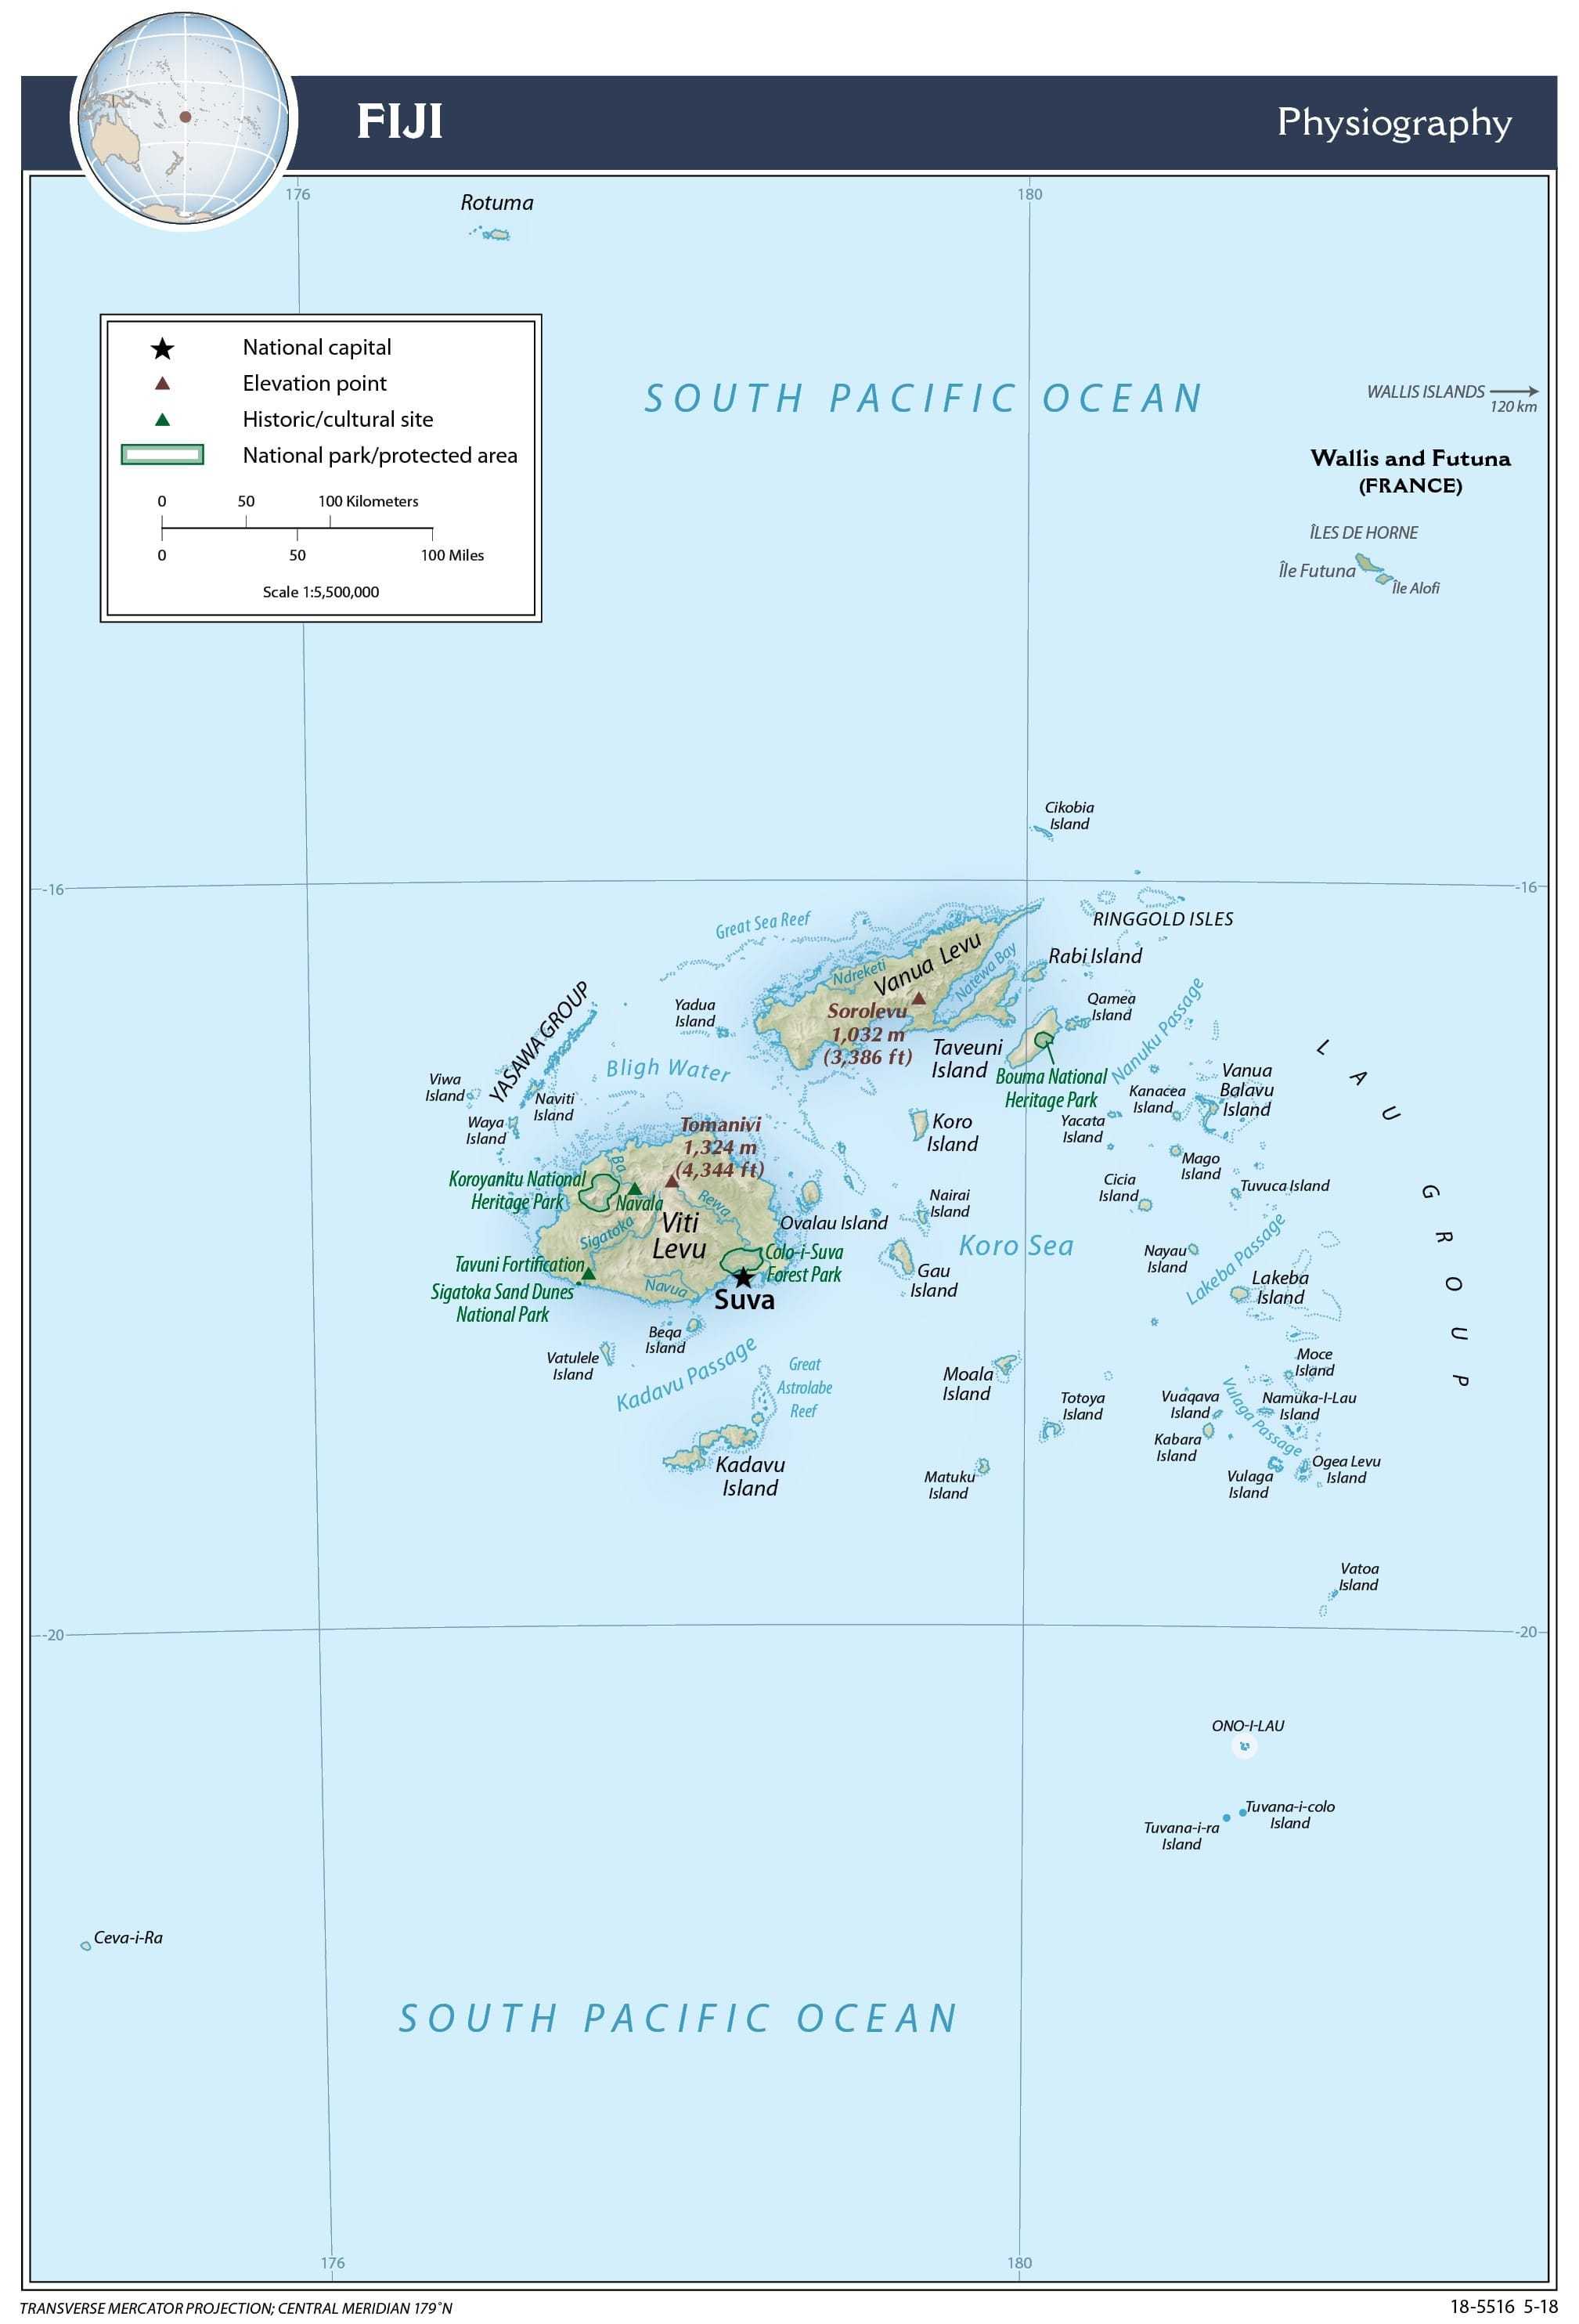 Physiography map of Fiji.